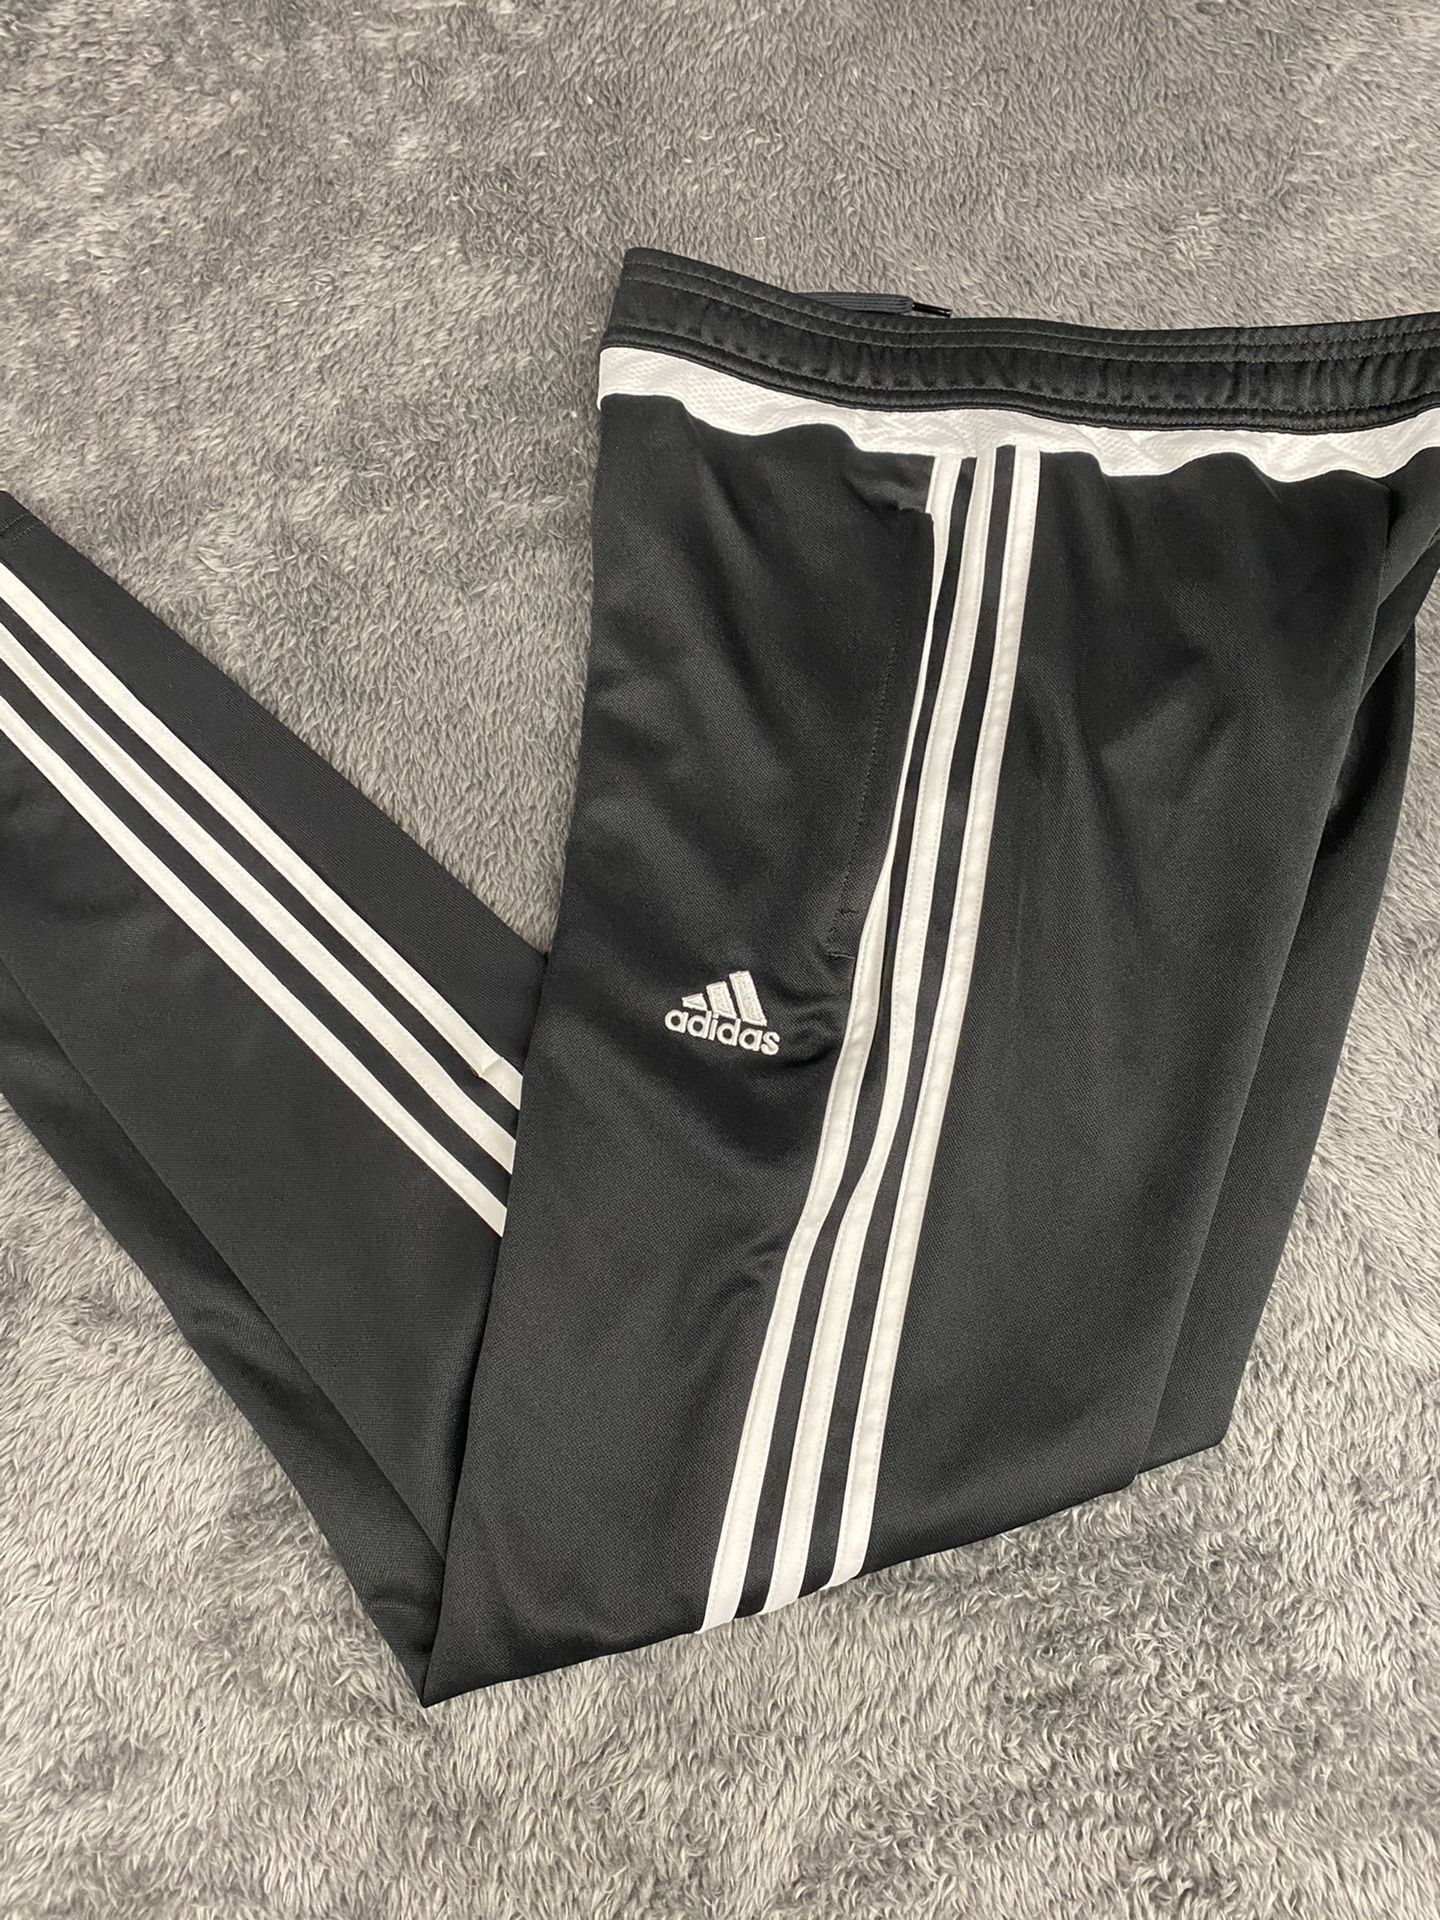 Adidas Men’s Small Black Athletic Pants in great shape!